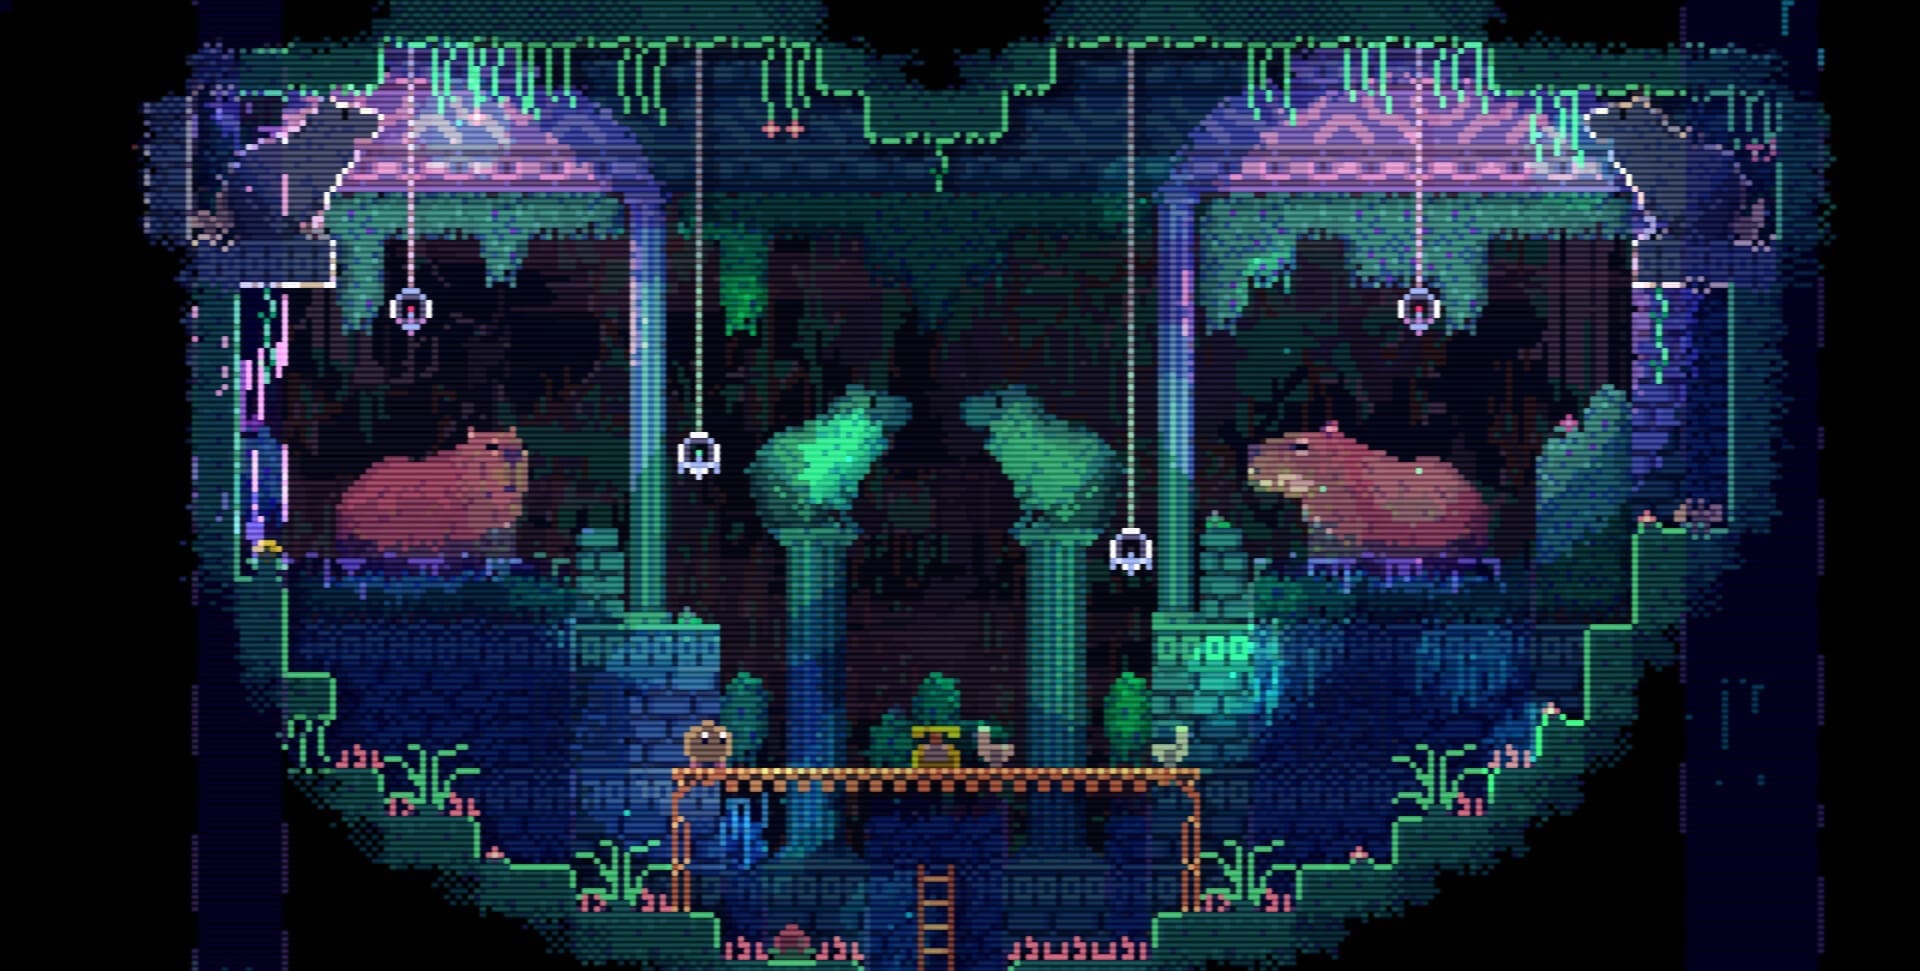 Animal Well: Not Your Average Metroidvania